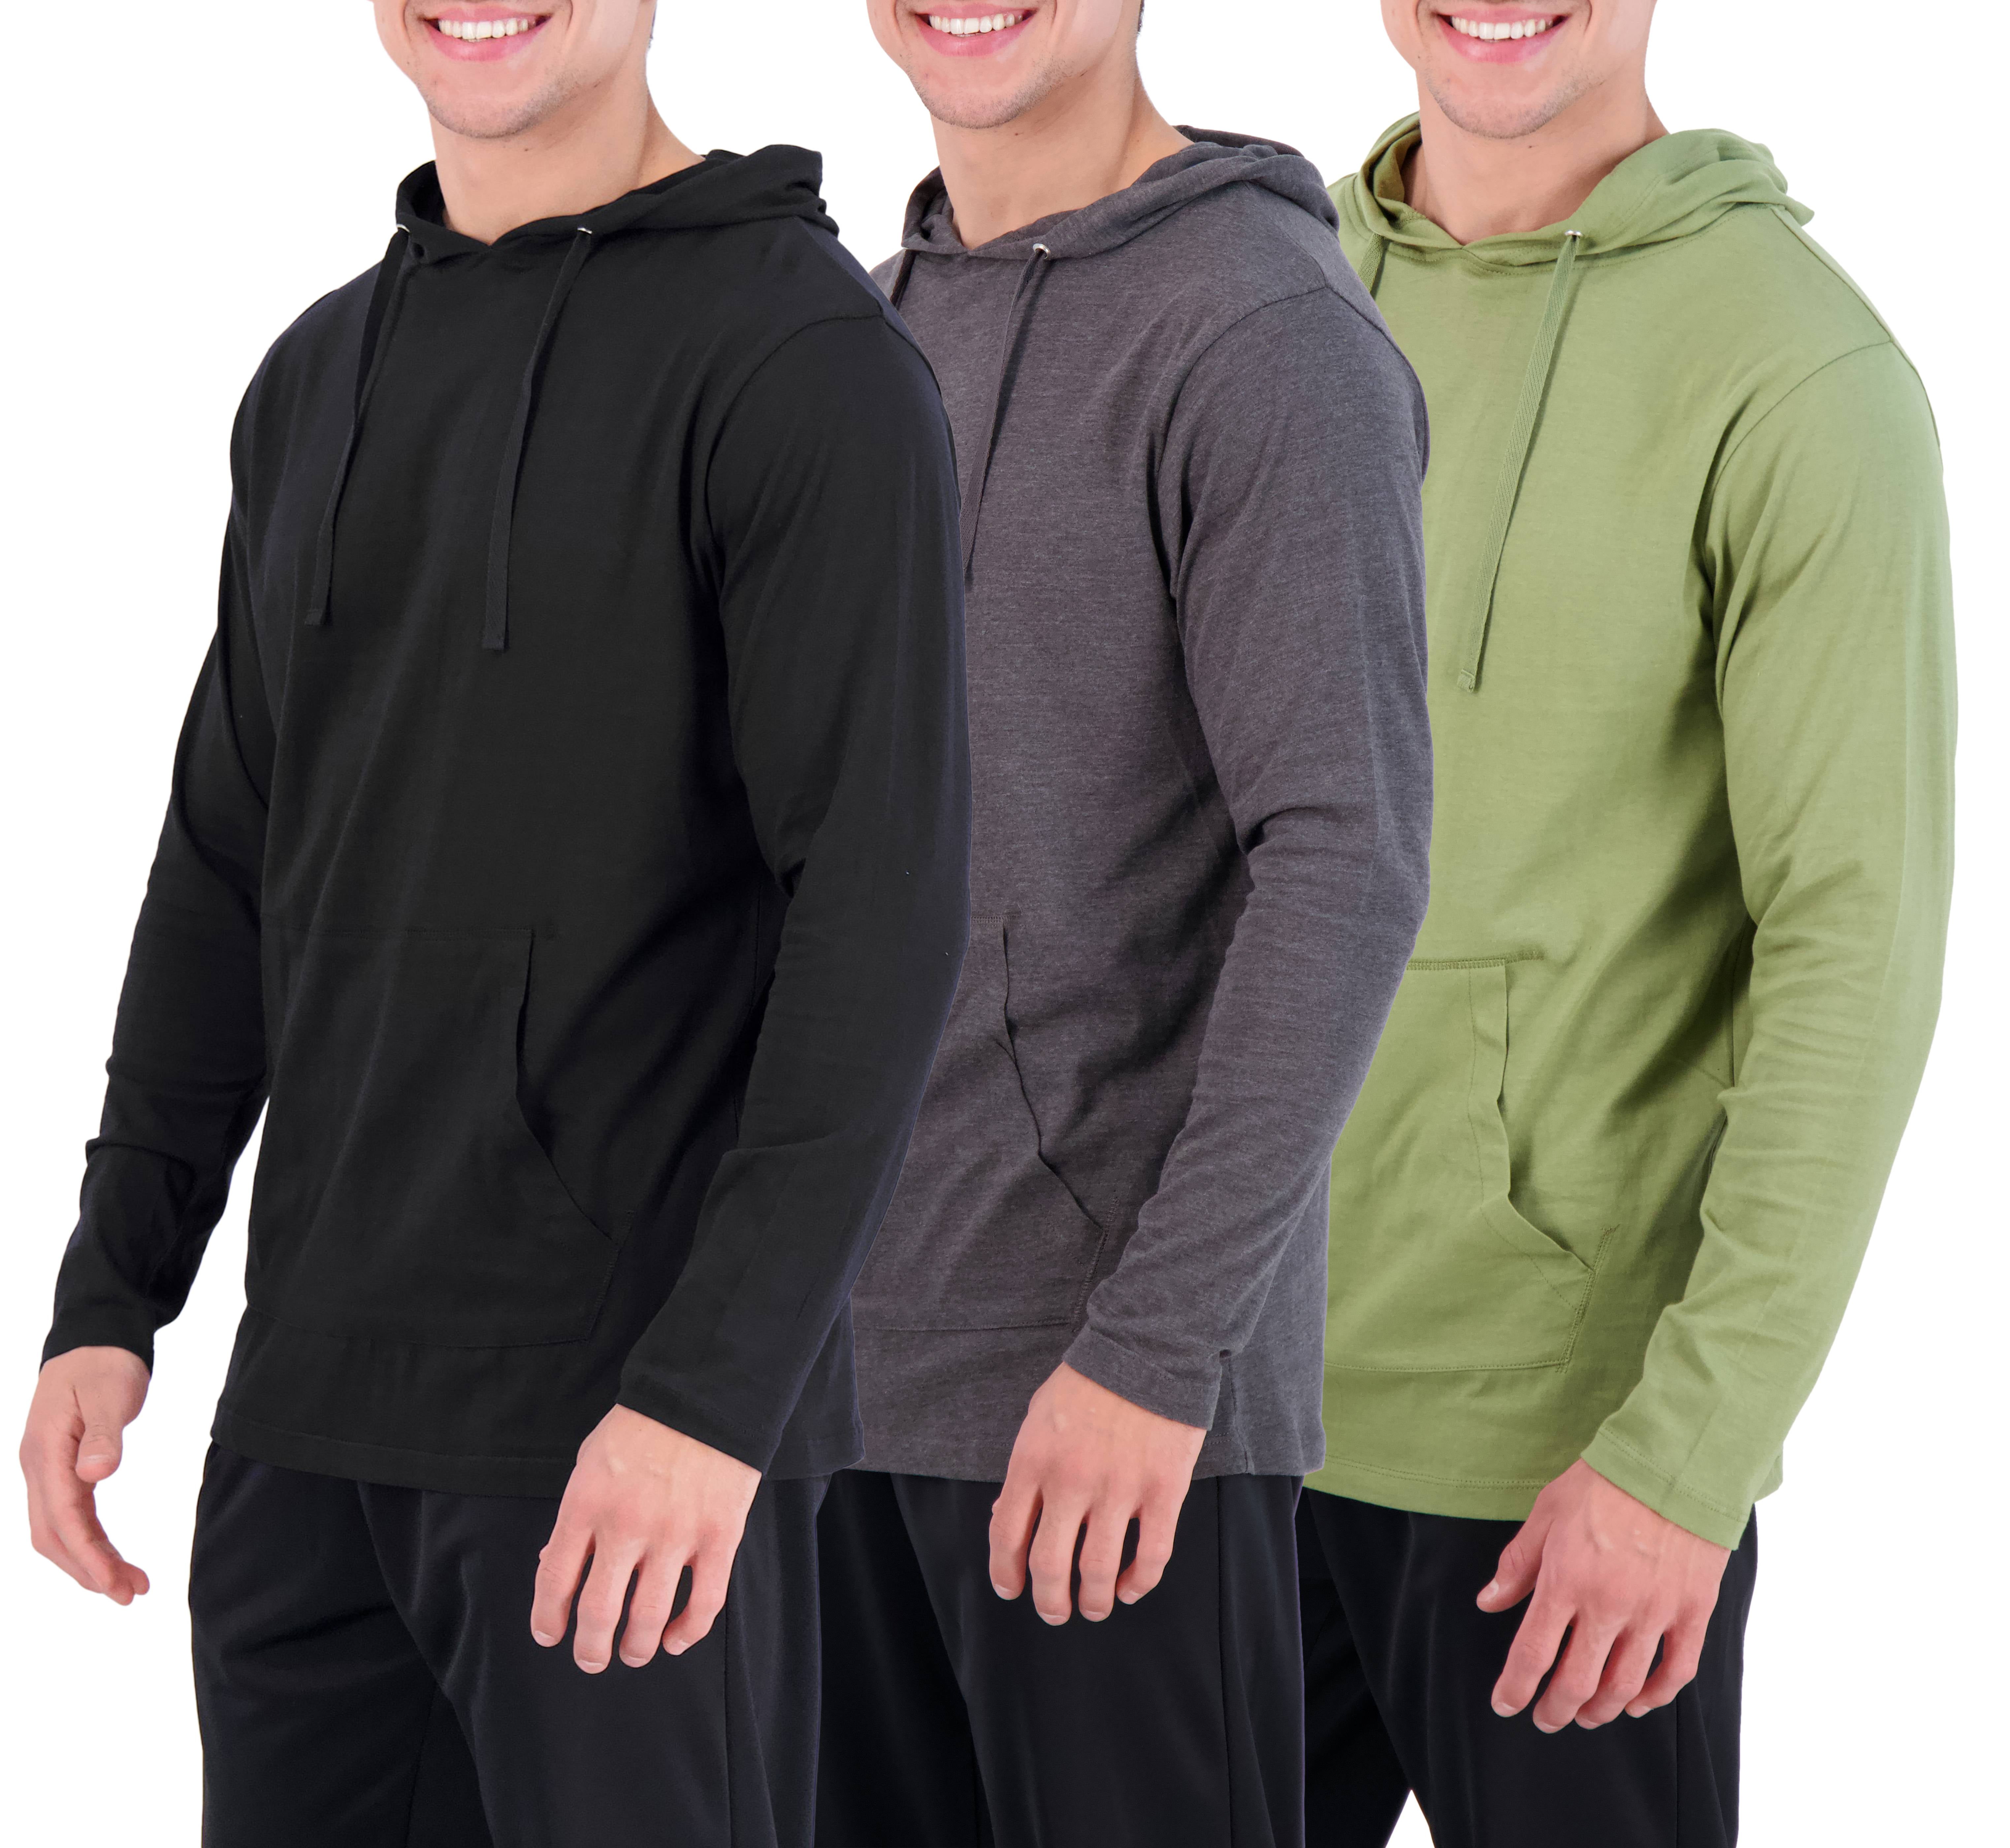 Men's Cotton Lightweight Casual Pullover Drawstring Hoodie With Pocket 3 Pack 